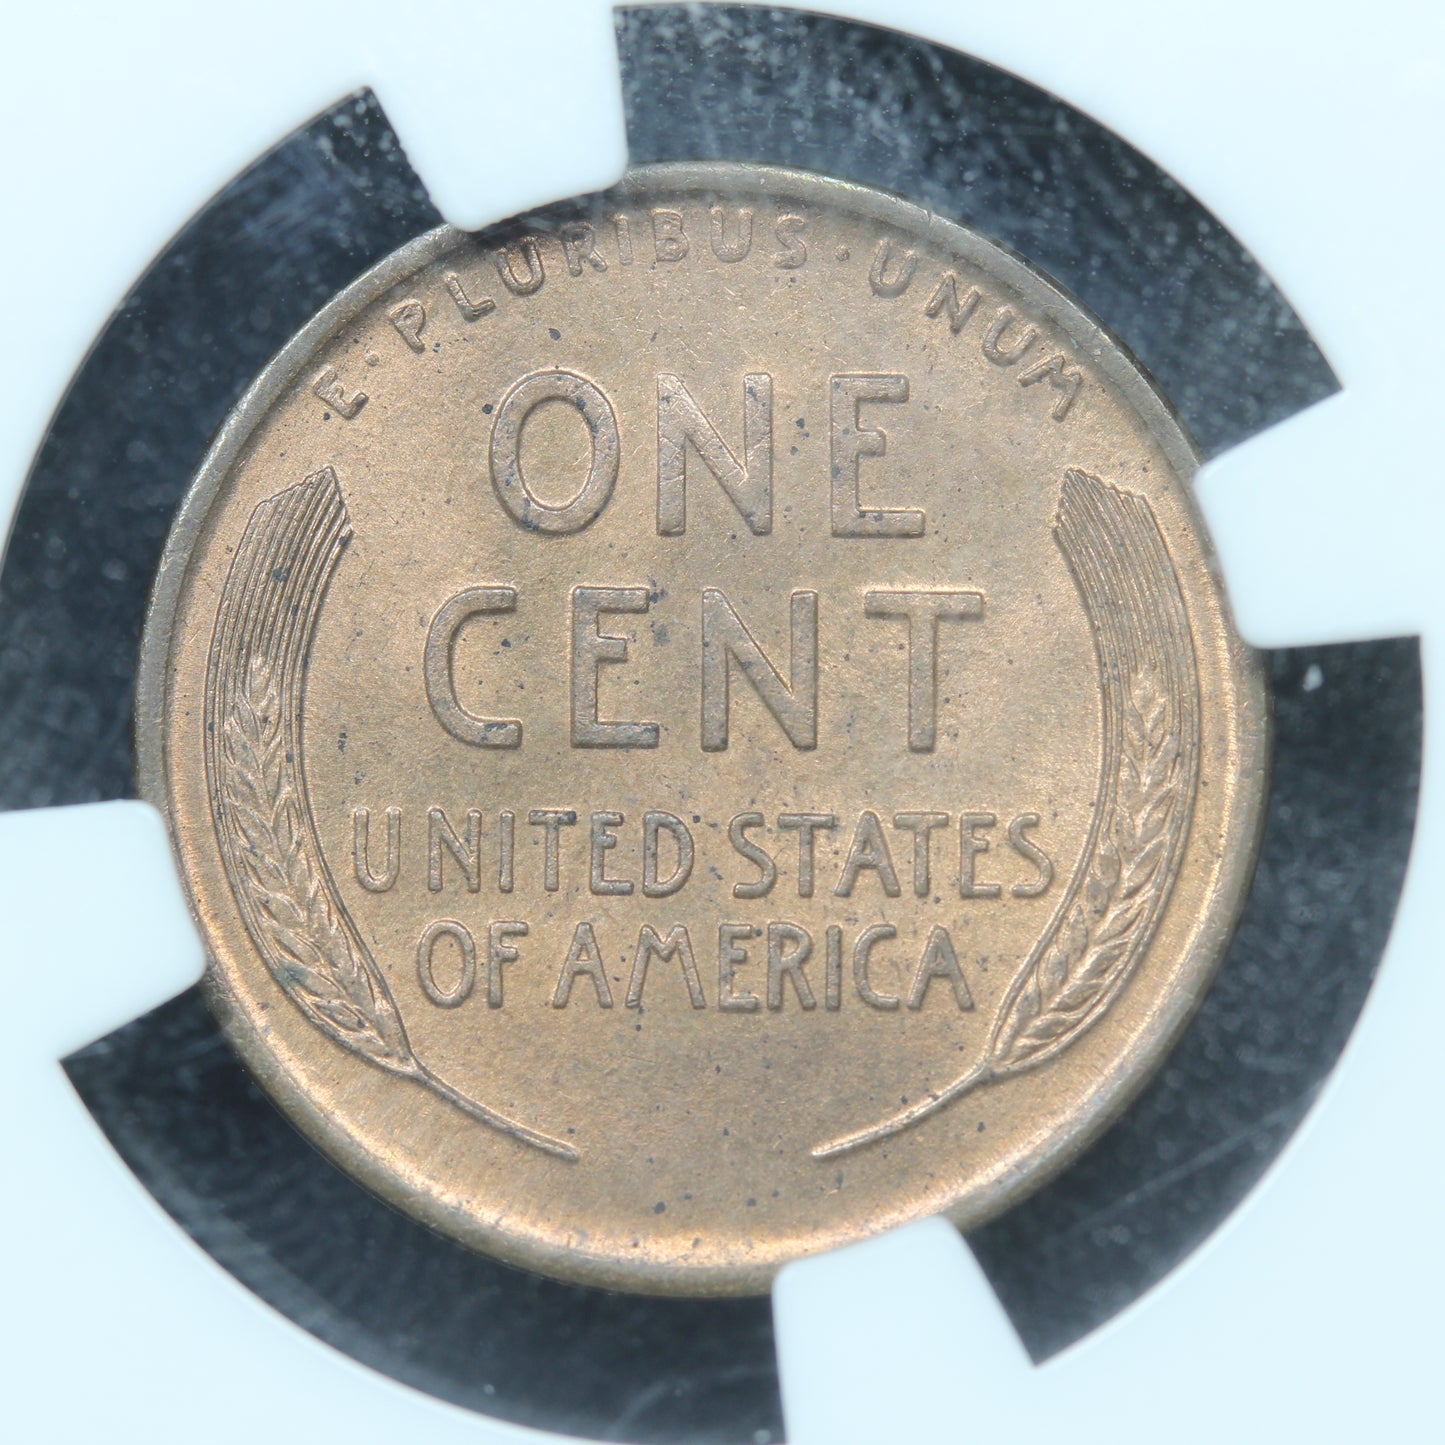 1911 D (Denver) 1C Lincoln Cent Wheat Penny - NGC MS 64 RB